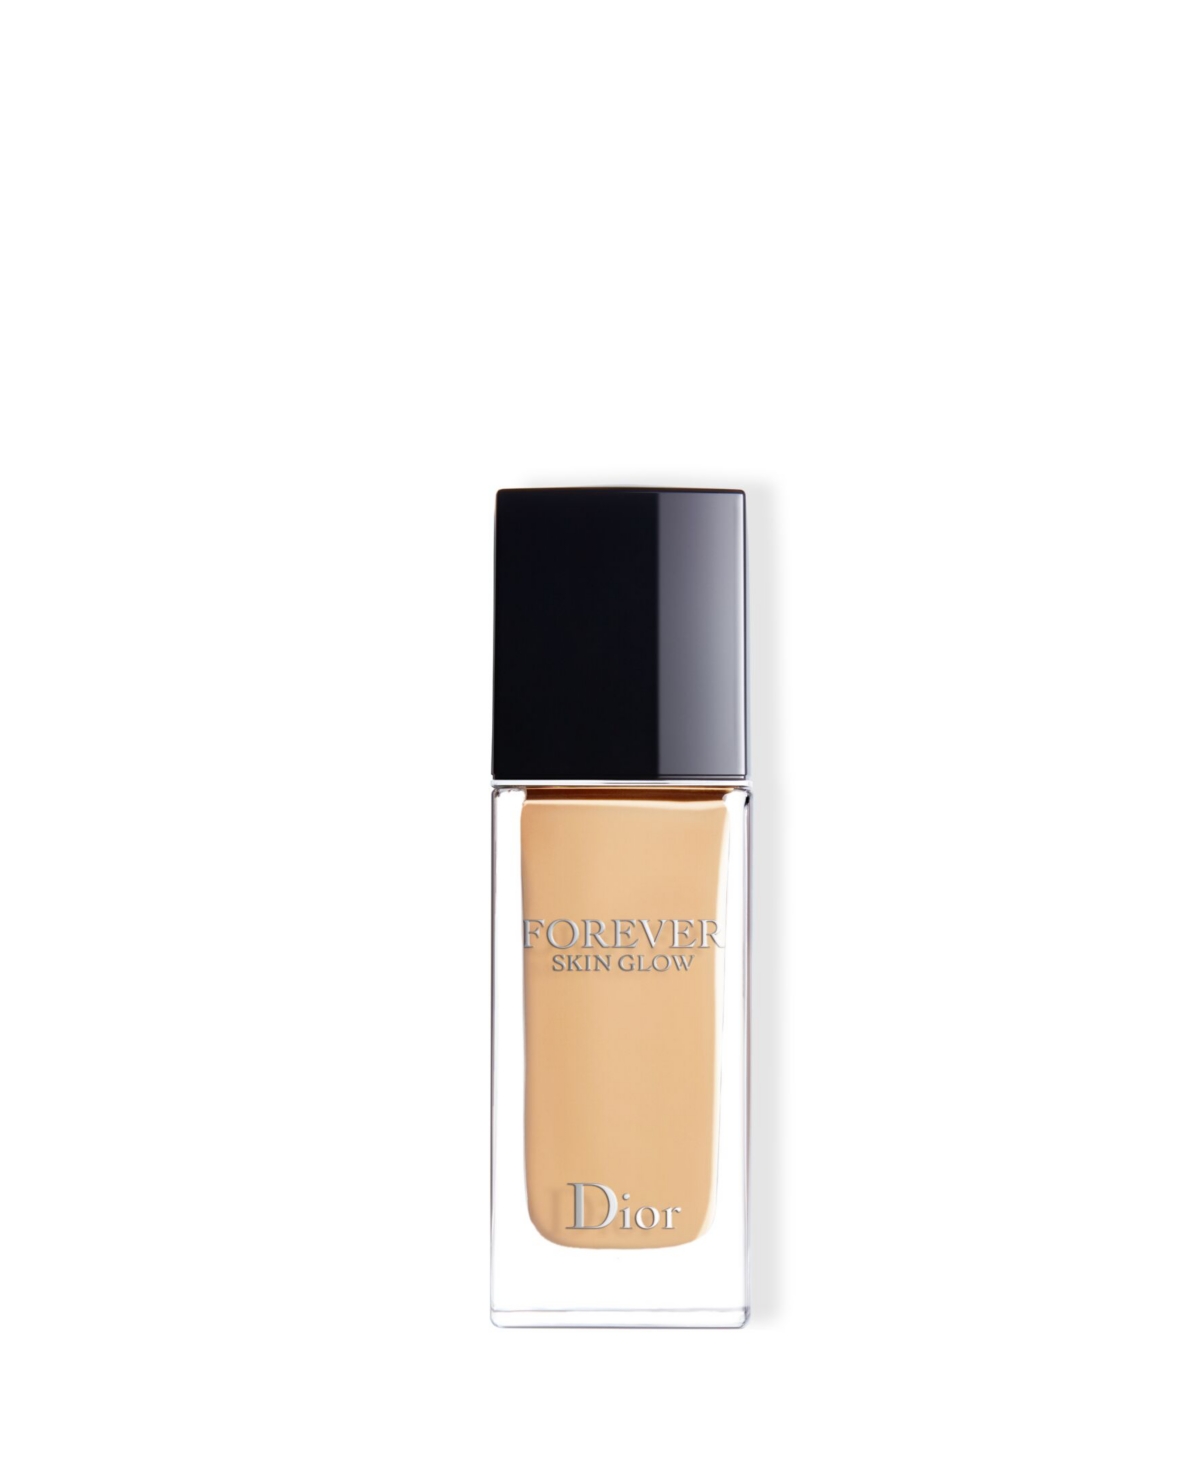 Dior Forever Skin Glow Hydrating Foundation Spf 15 In . Warm (light Skin With Warm Tones)